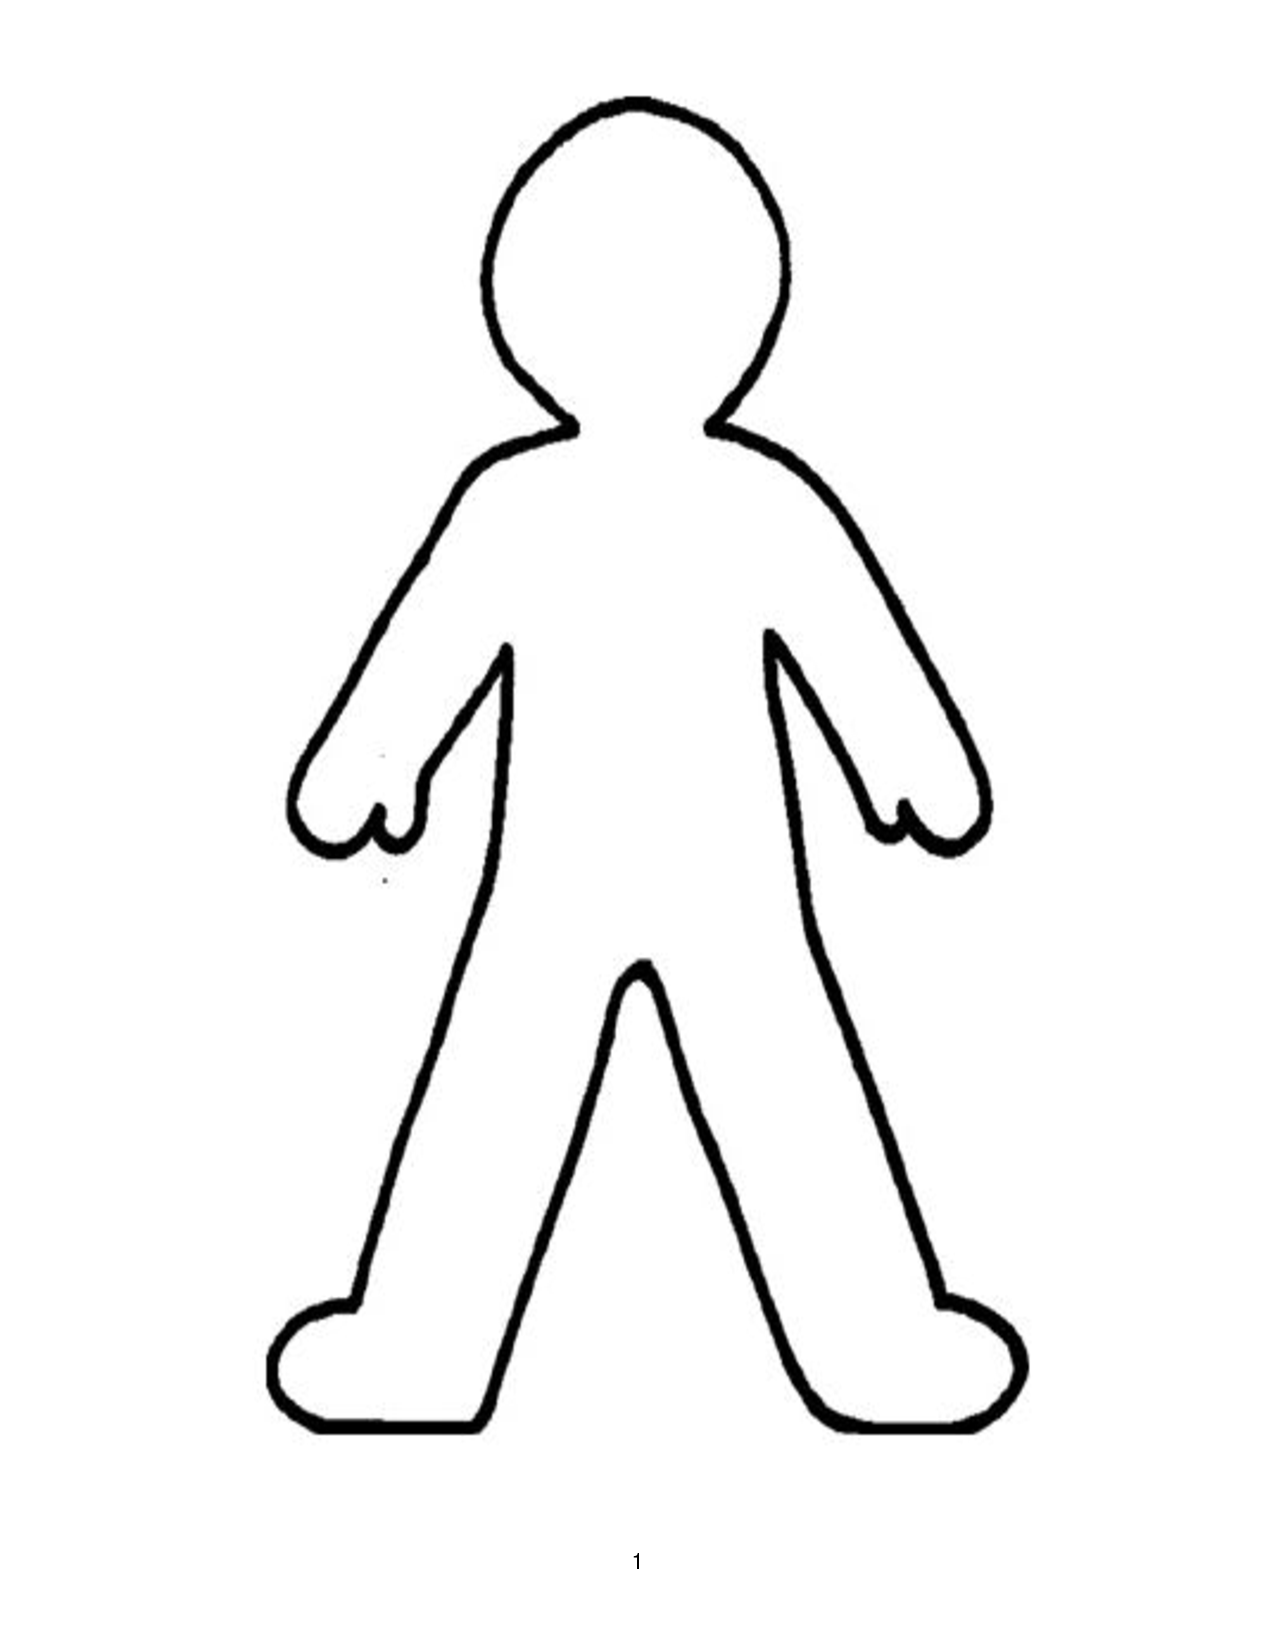 30 Blank Outline Bodies - ClipArt Best